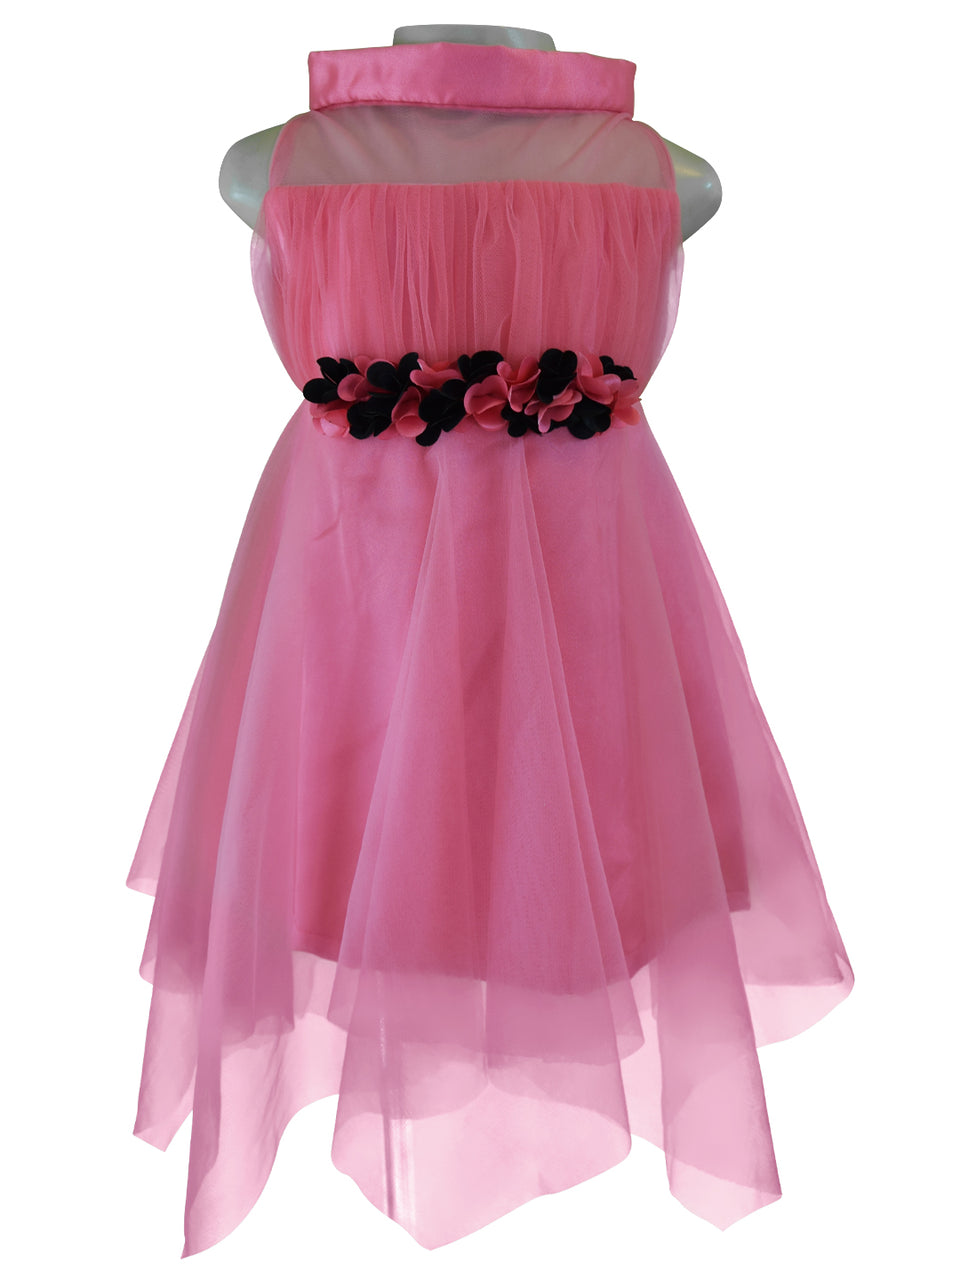 Dresses for Teenage Girls | Teen Age Party Dresses - faye